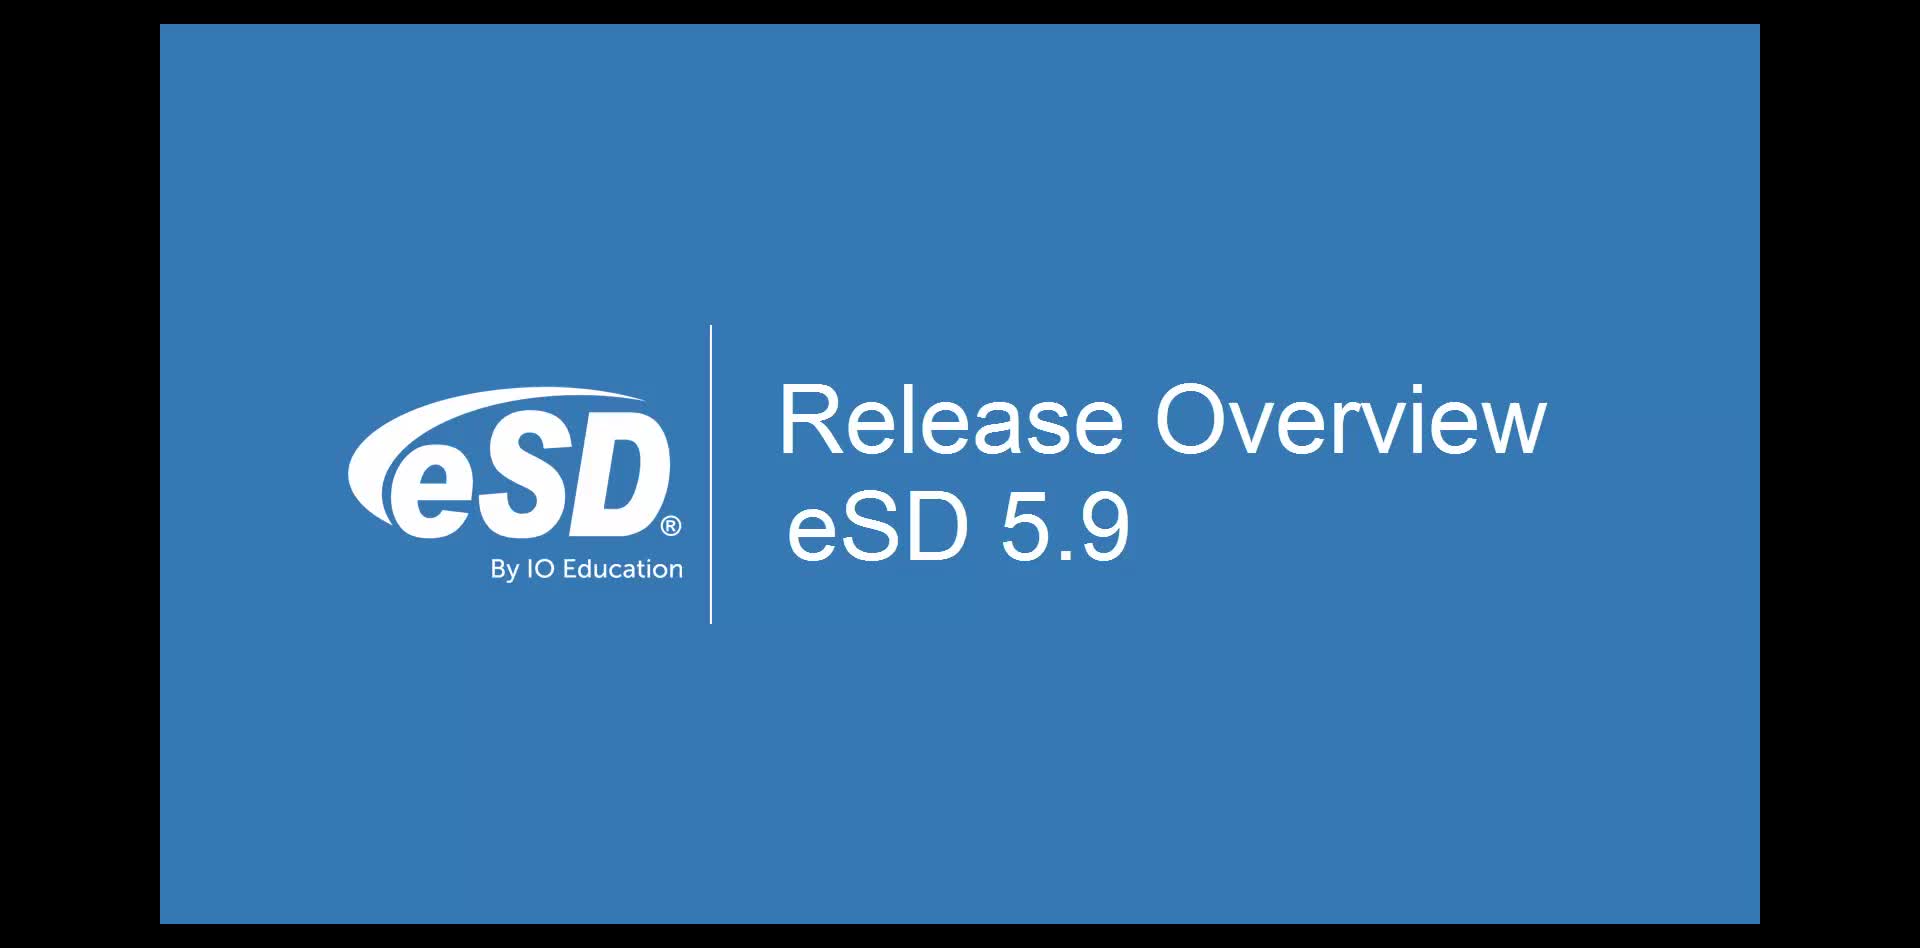 eSD 5.9 Release Overview